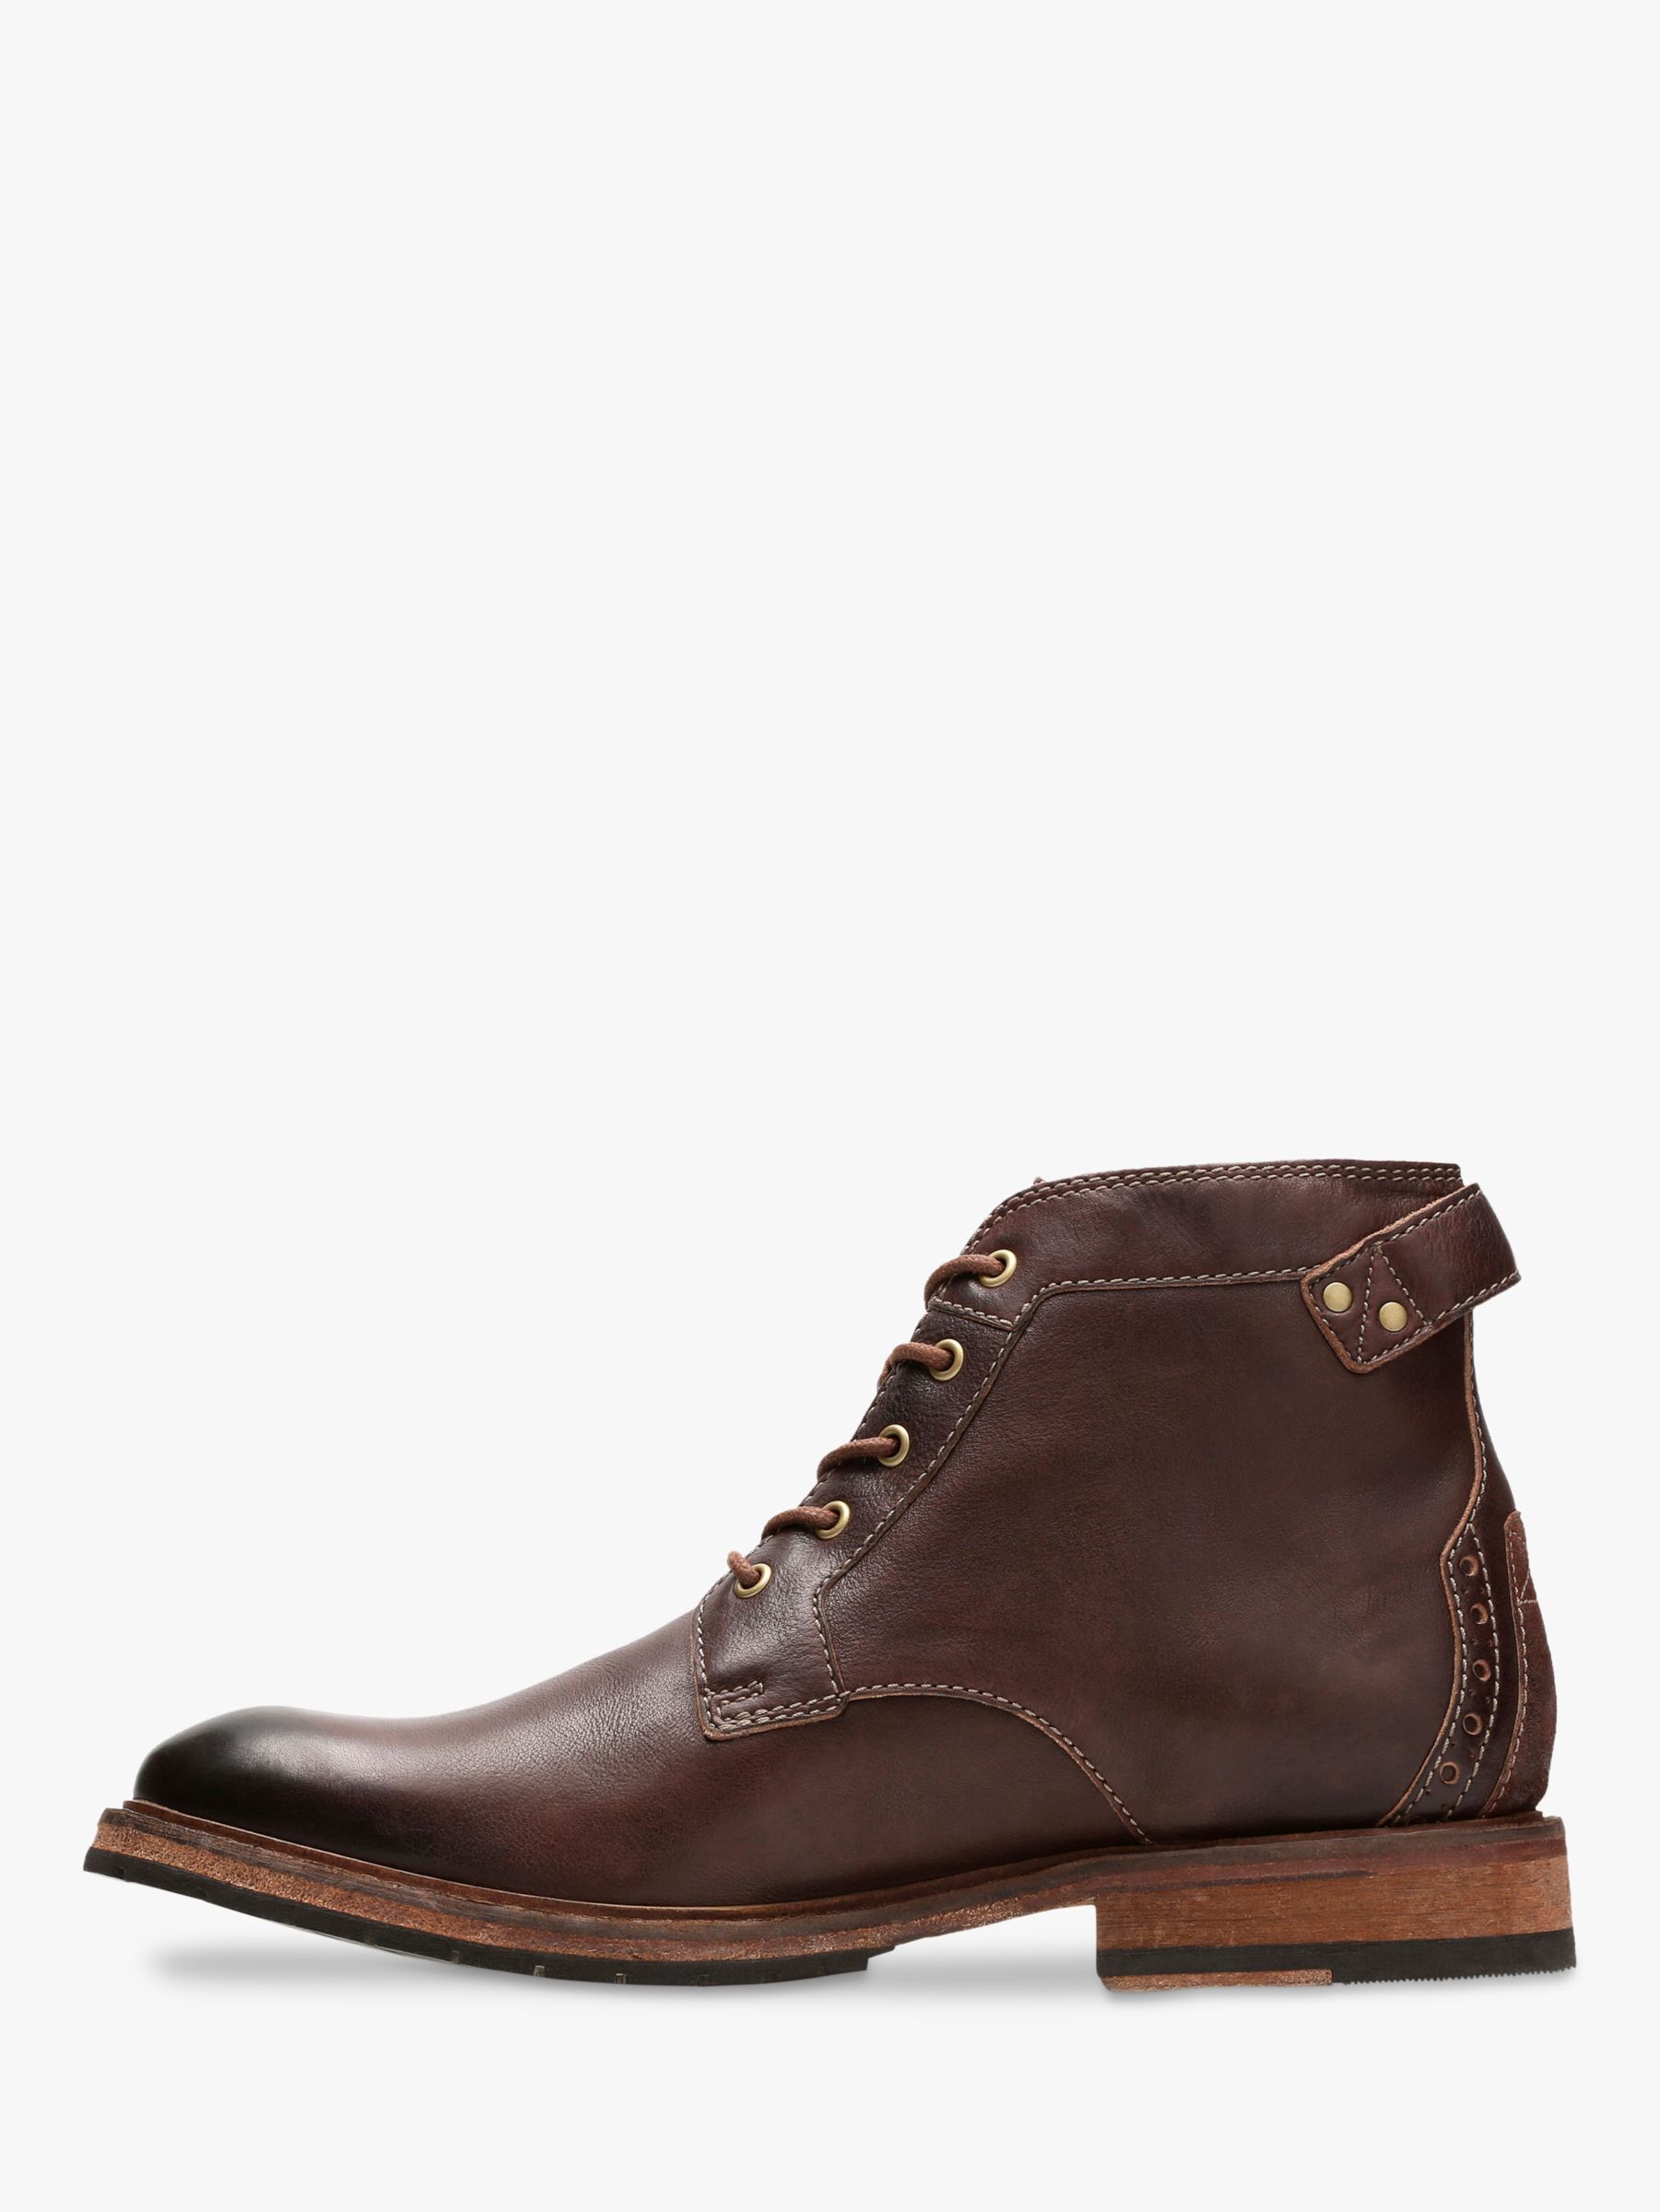 Clarks Clarkdale Bud Leather Boots, Mahogany